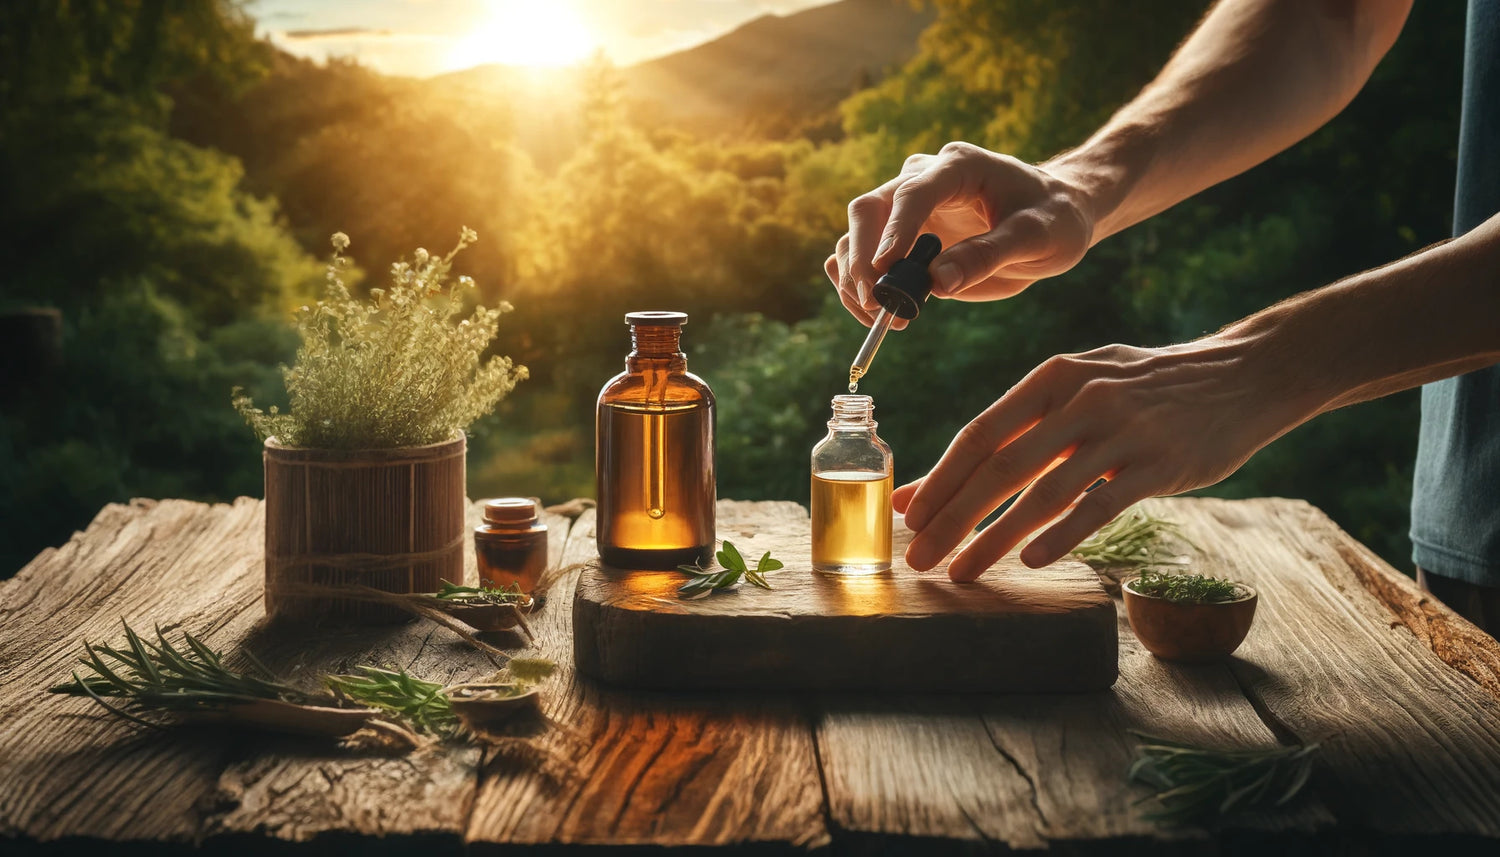 A serene landscape depicting a person diluting an essential oil with a carrier oil.